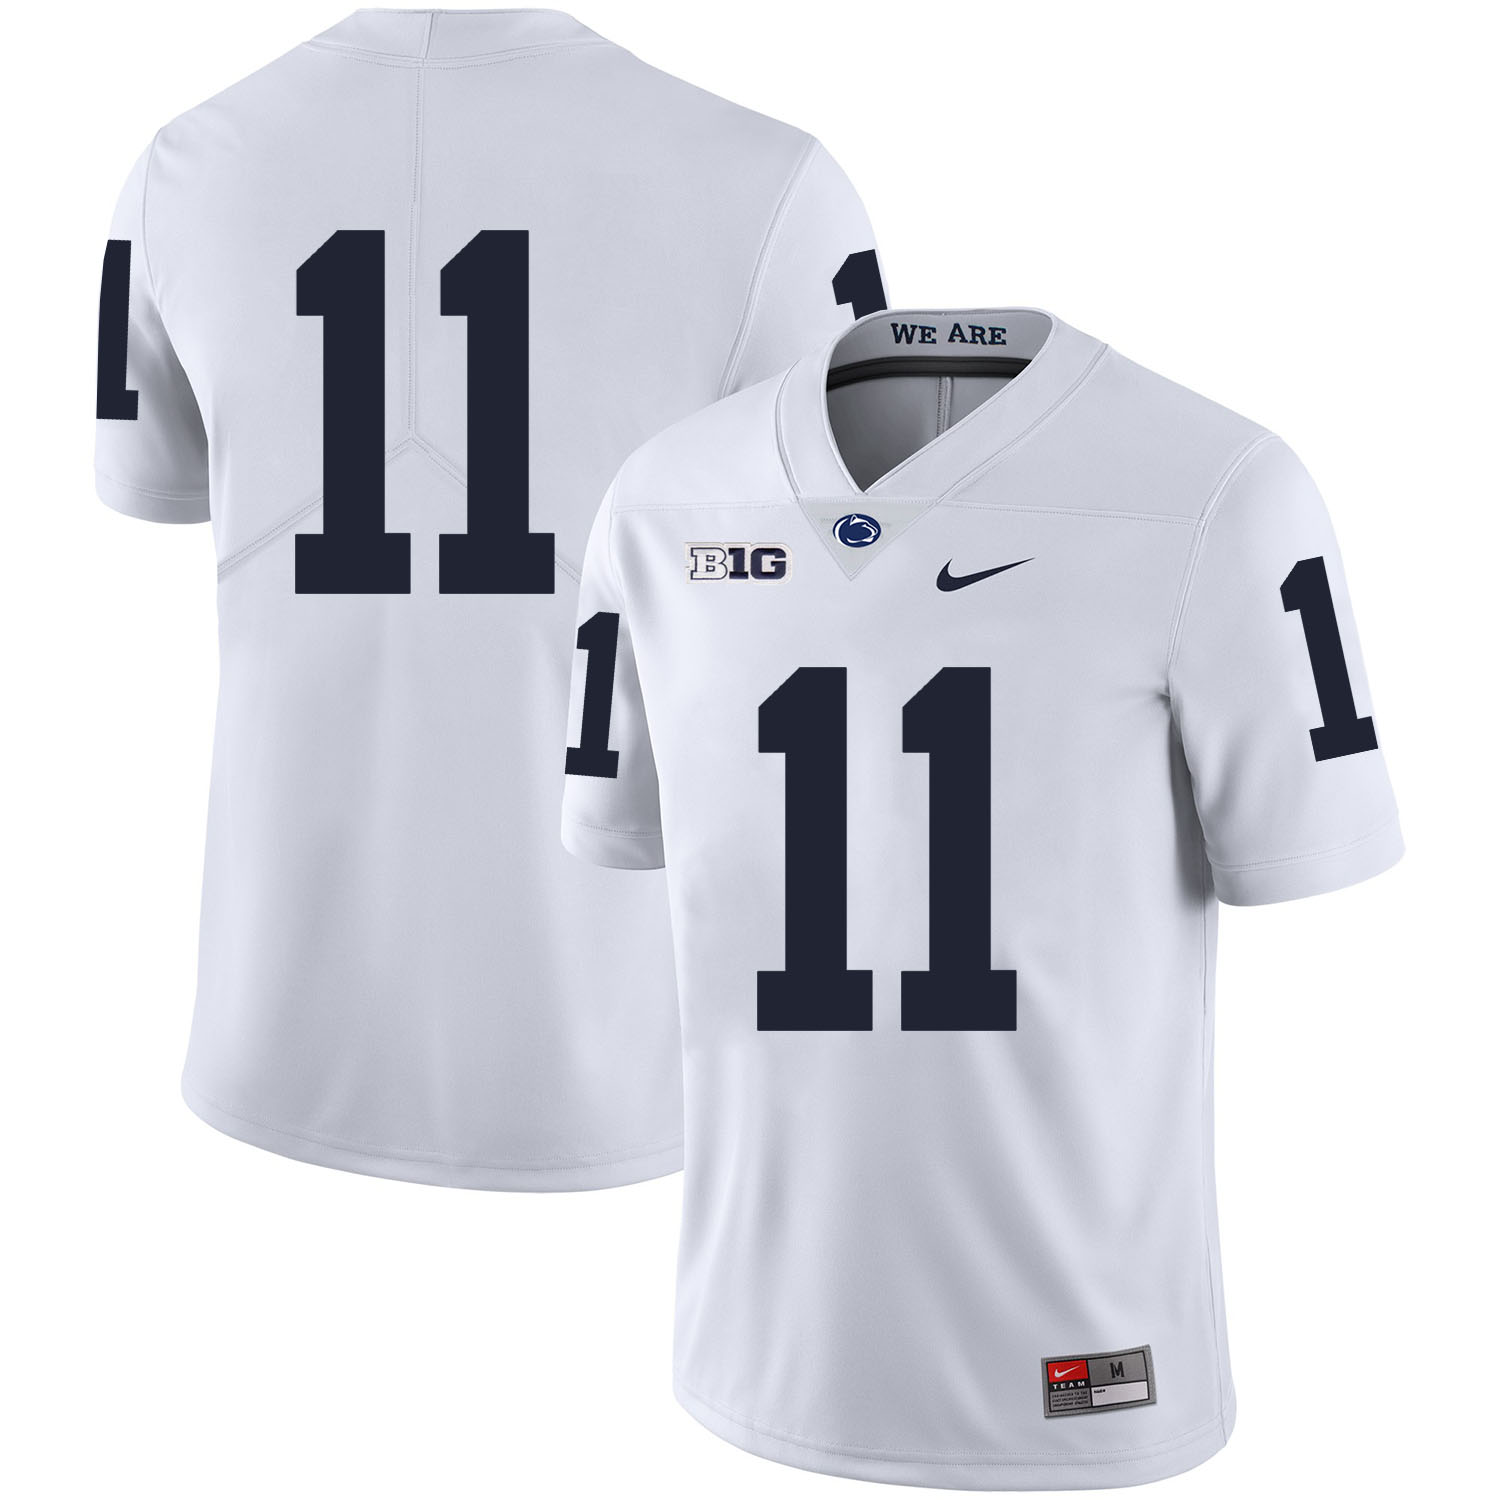 Penn State Nittany Lions 11 Brandon Bell White Nike College Football Jersey